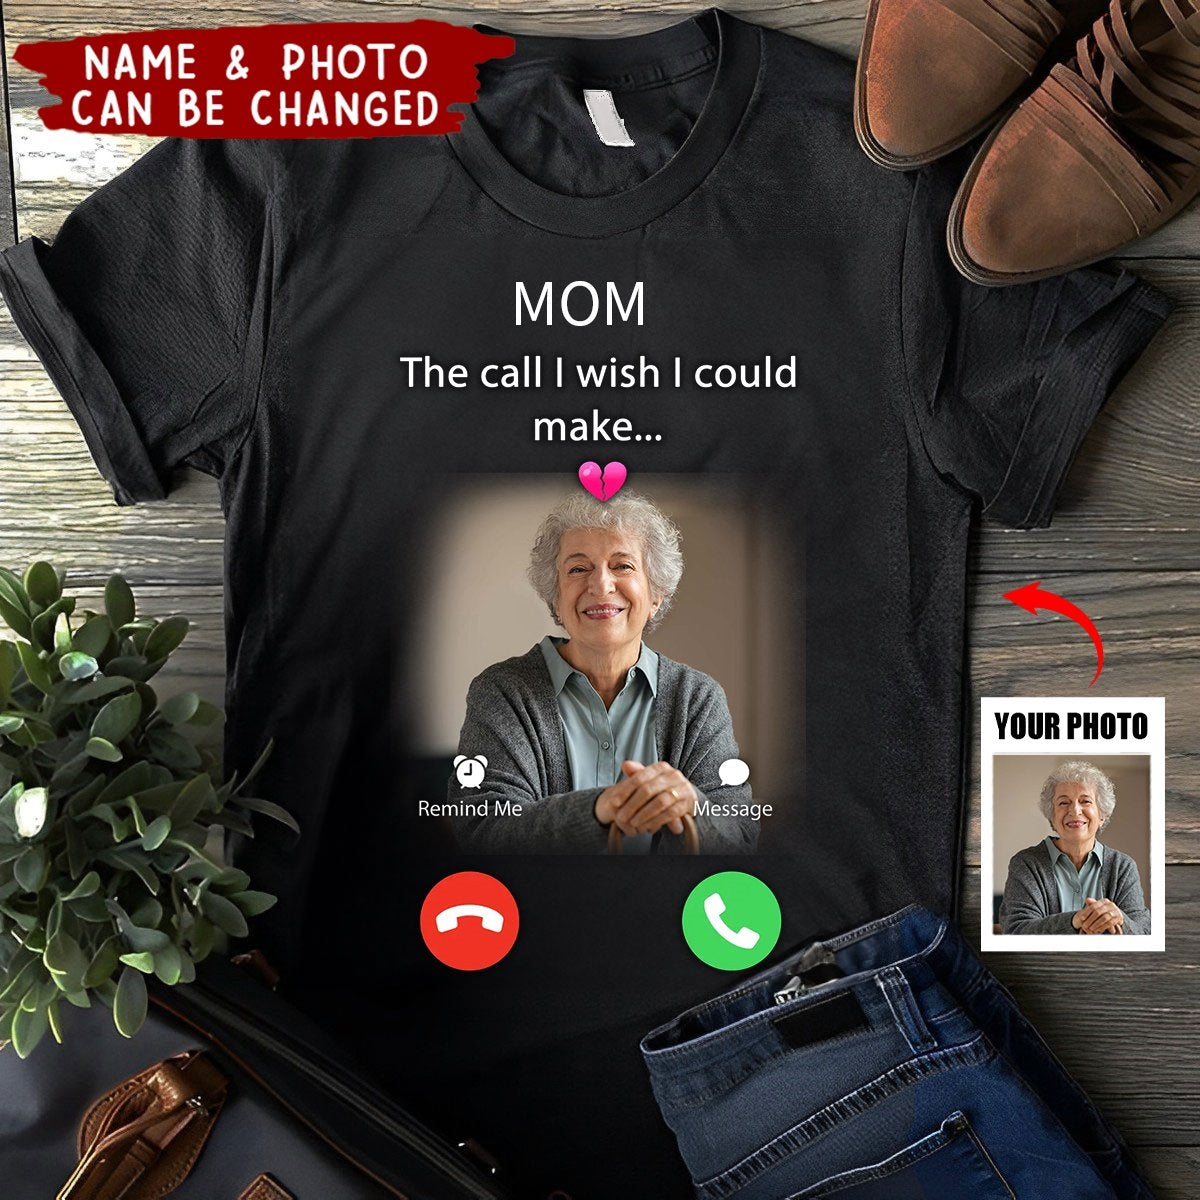 The Call I Wish I Could Make - Personalized Memorial Mom / Dad Shirt - Upload Photo